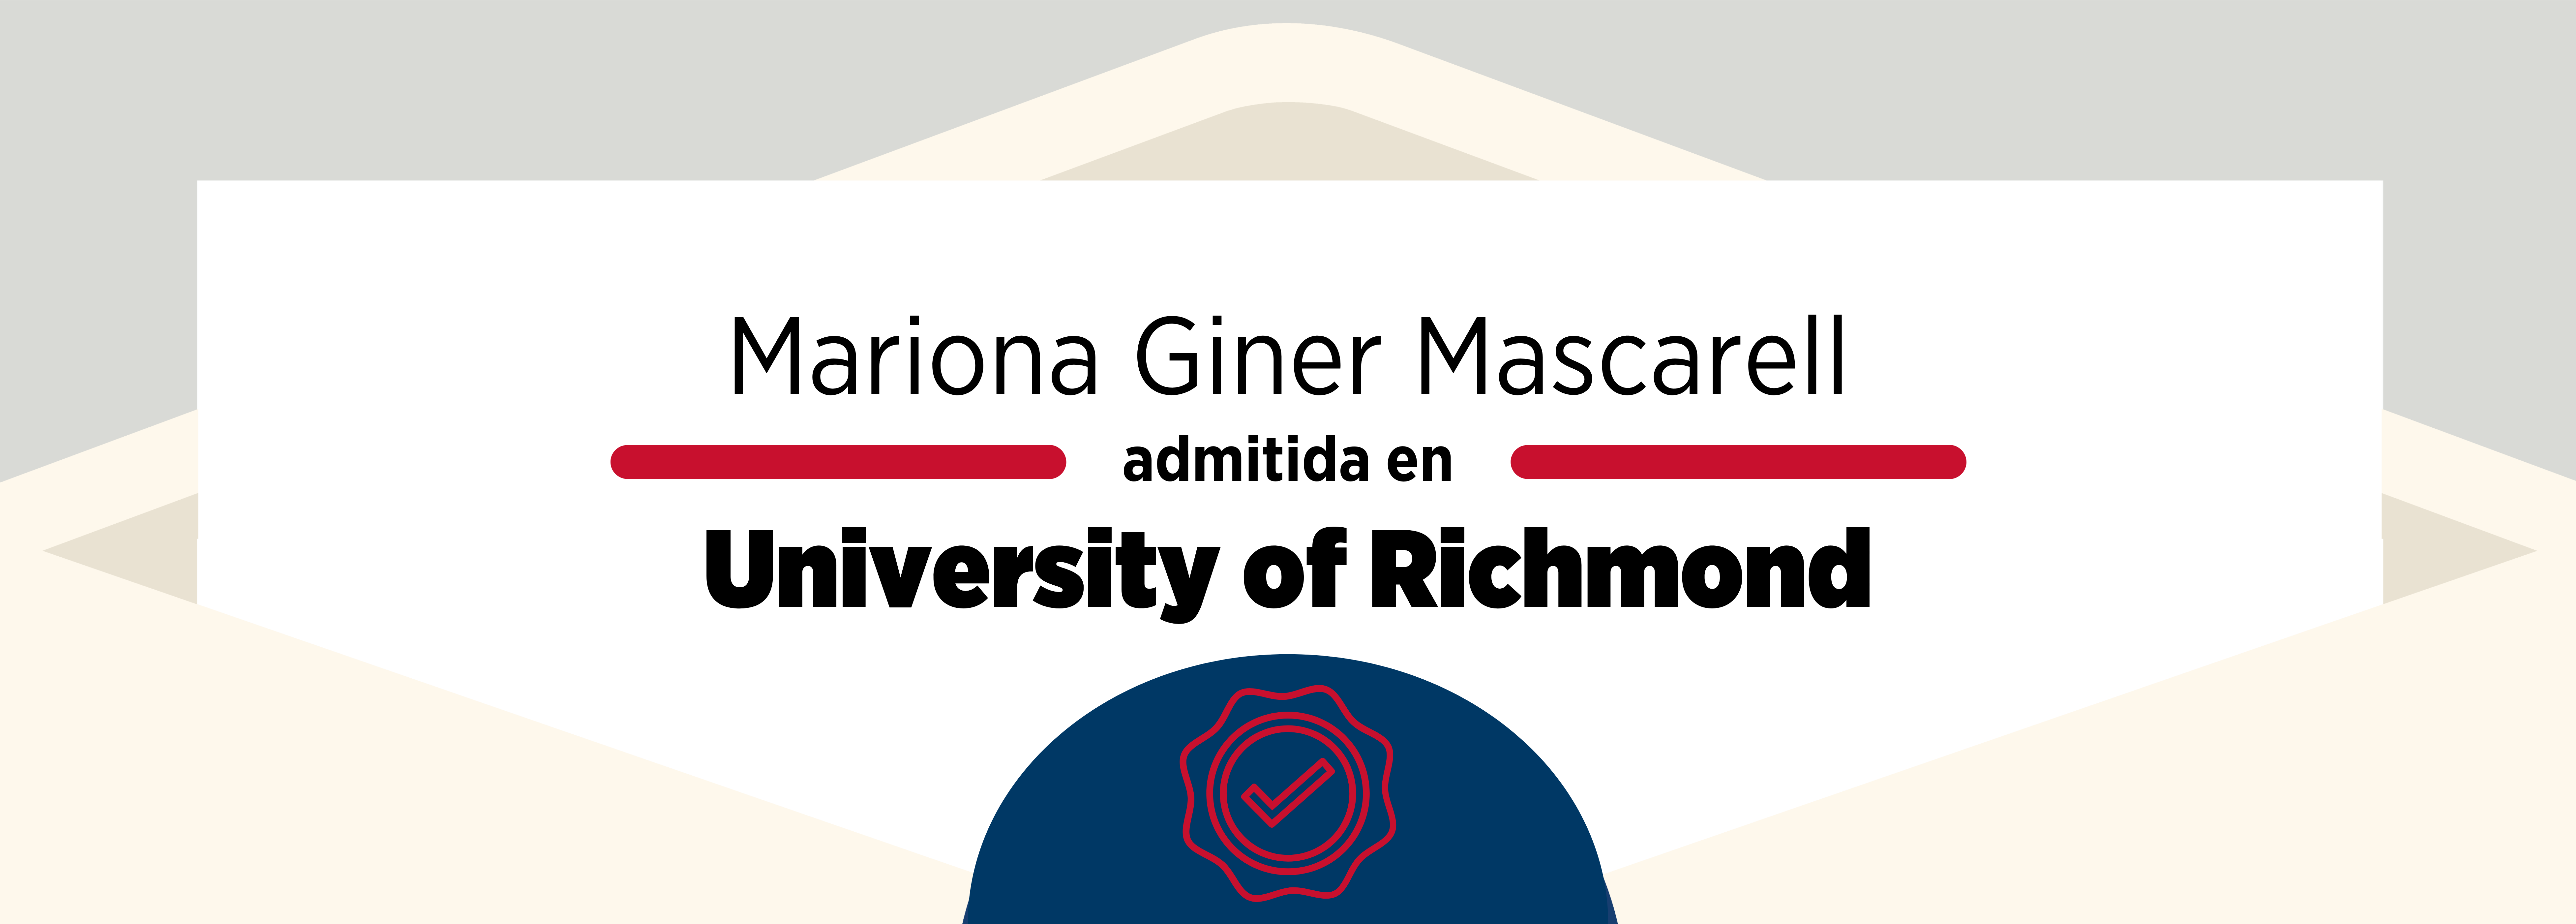 Admissions 2022: Mariona Giner Mascarell & University of Richmond